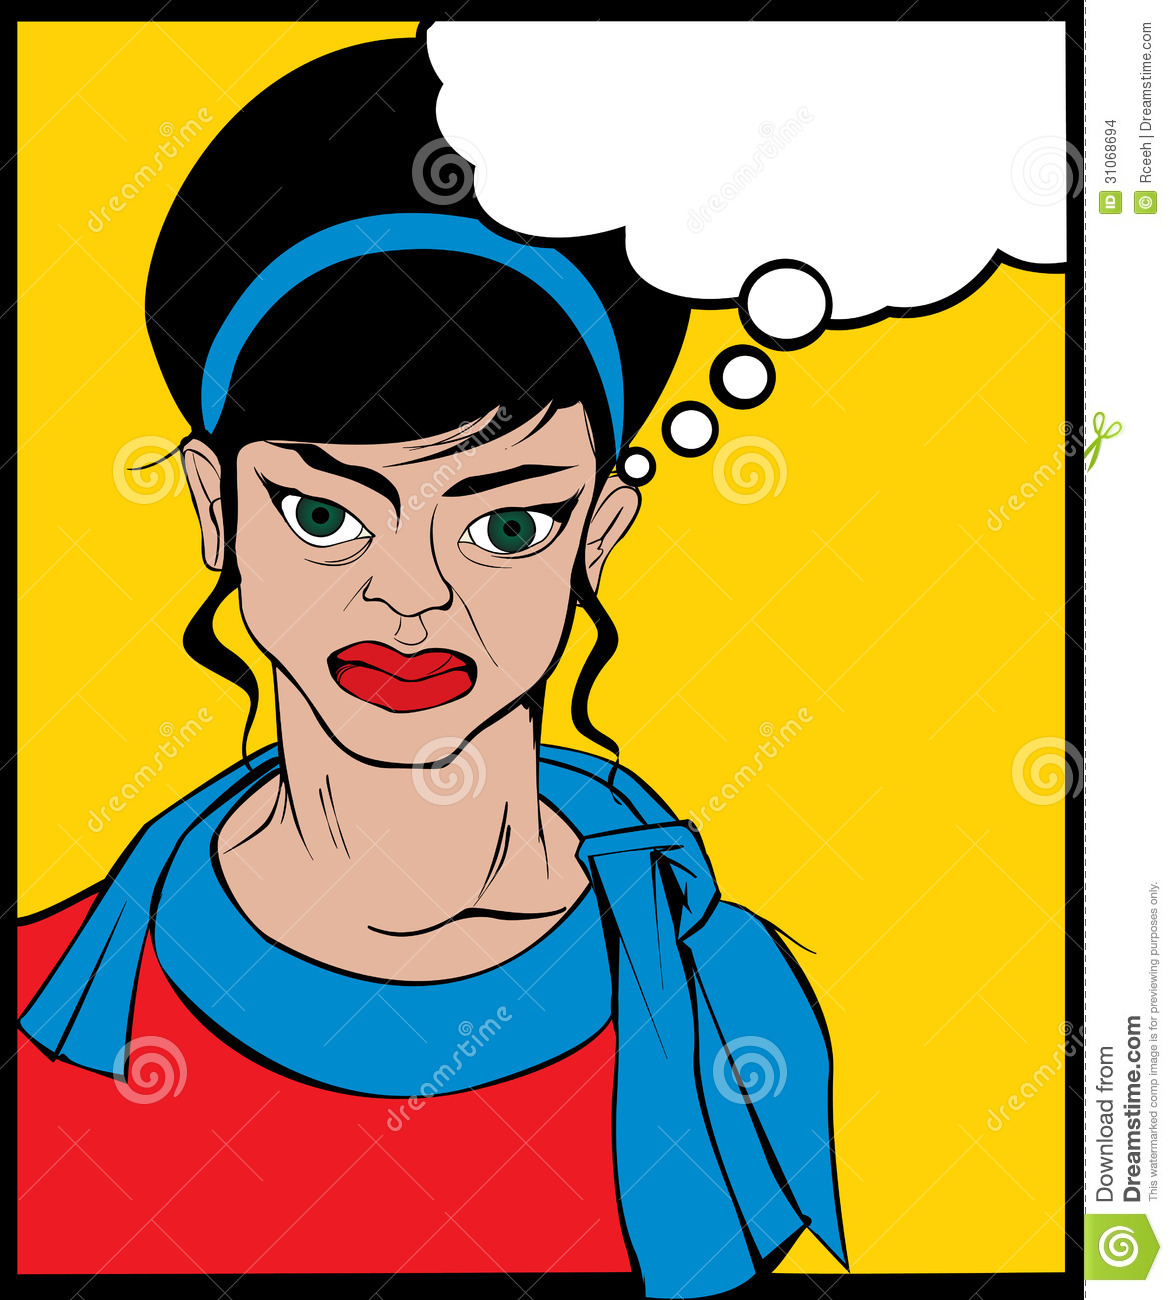 Angry Woman Stock Images   Image  31068694